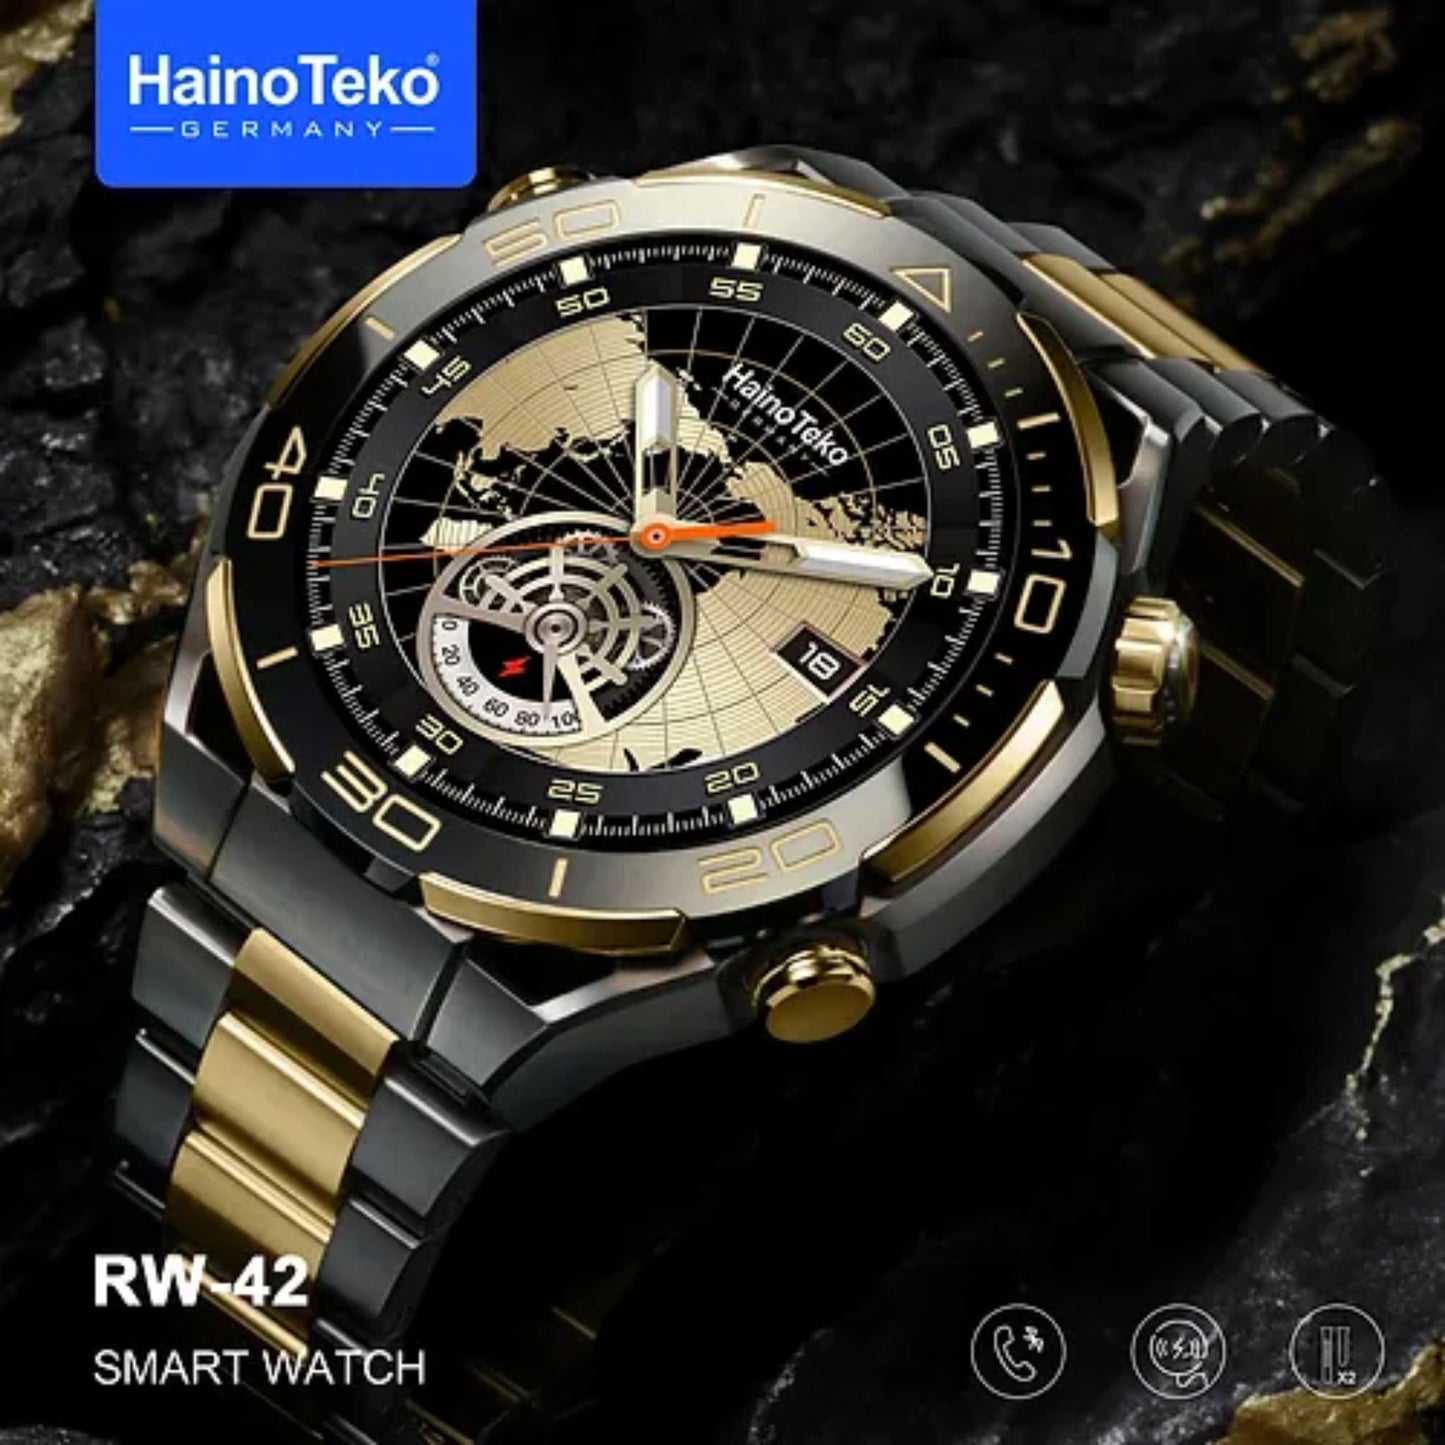 Haino Teko Germany RW-42 Round Shape Large Screen AMOLED Display Smart Watch With 2 Pair Straps and Wireless Charger For Men's and Boys